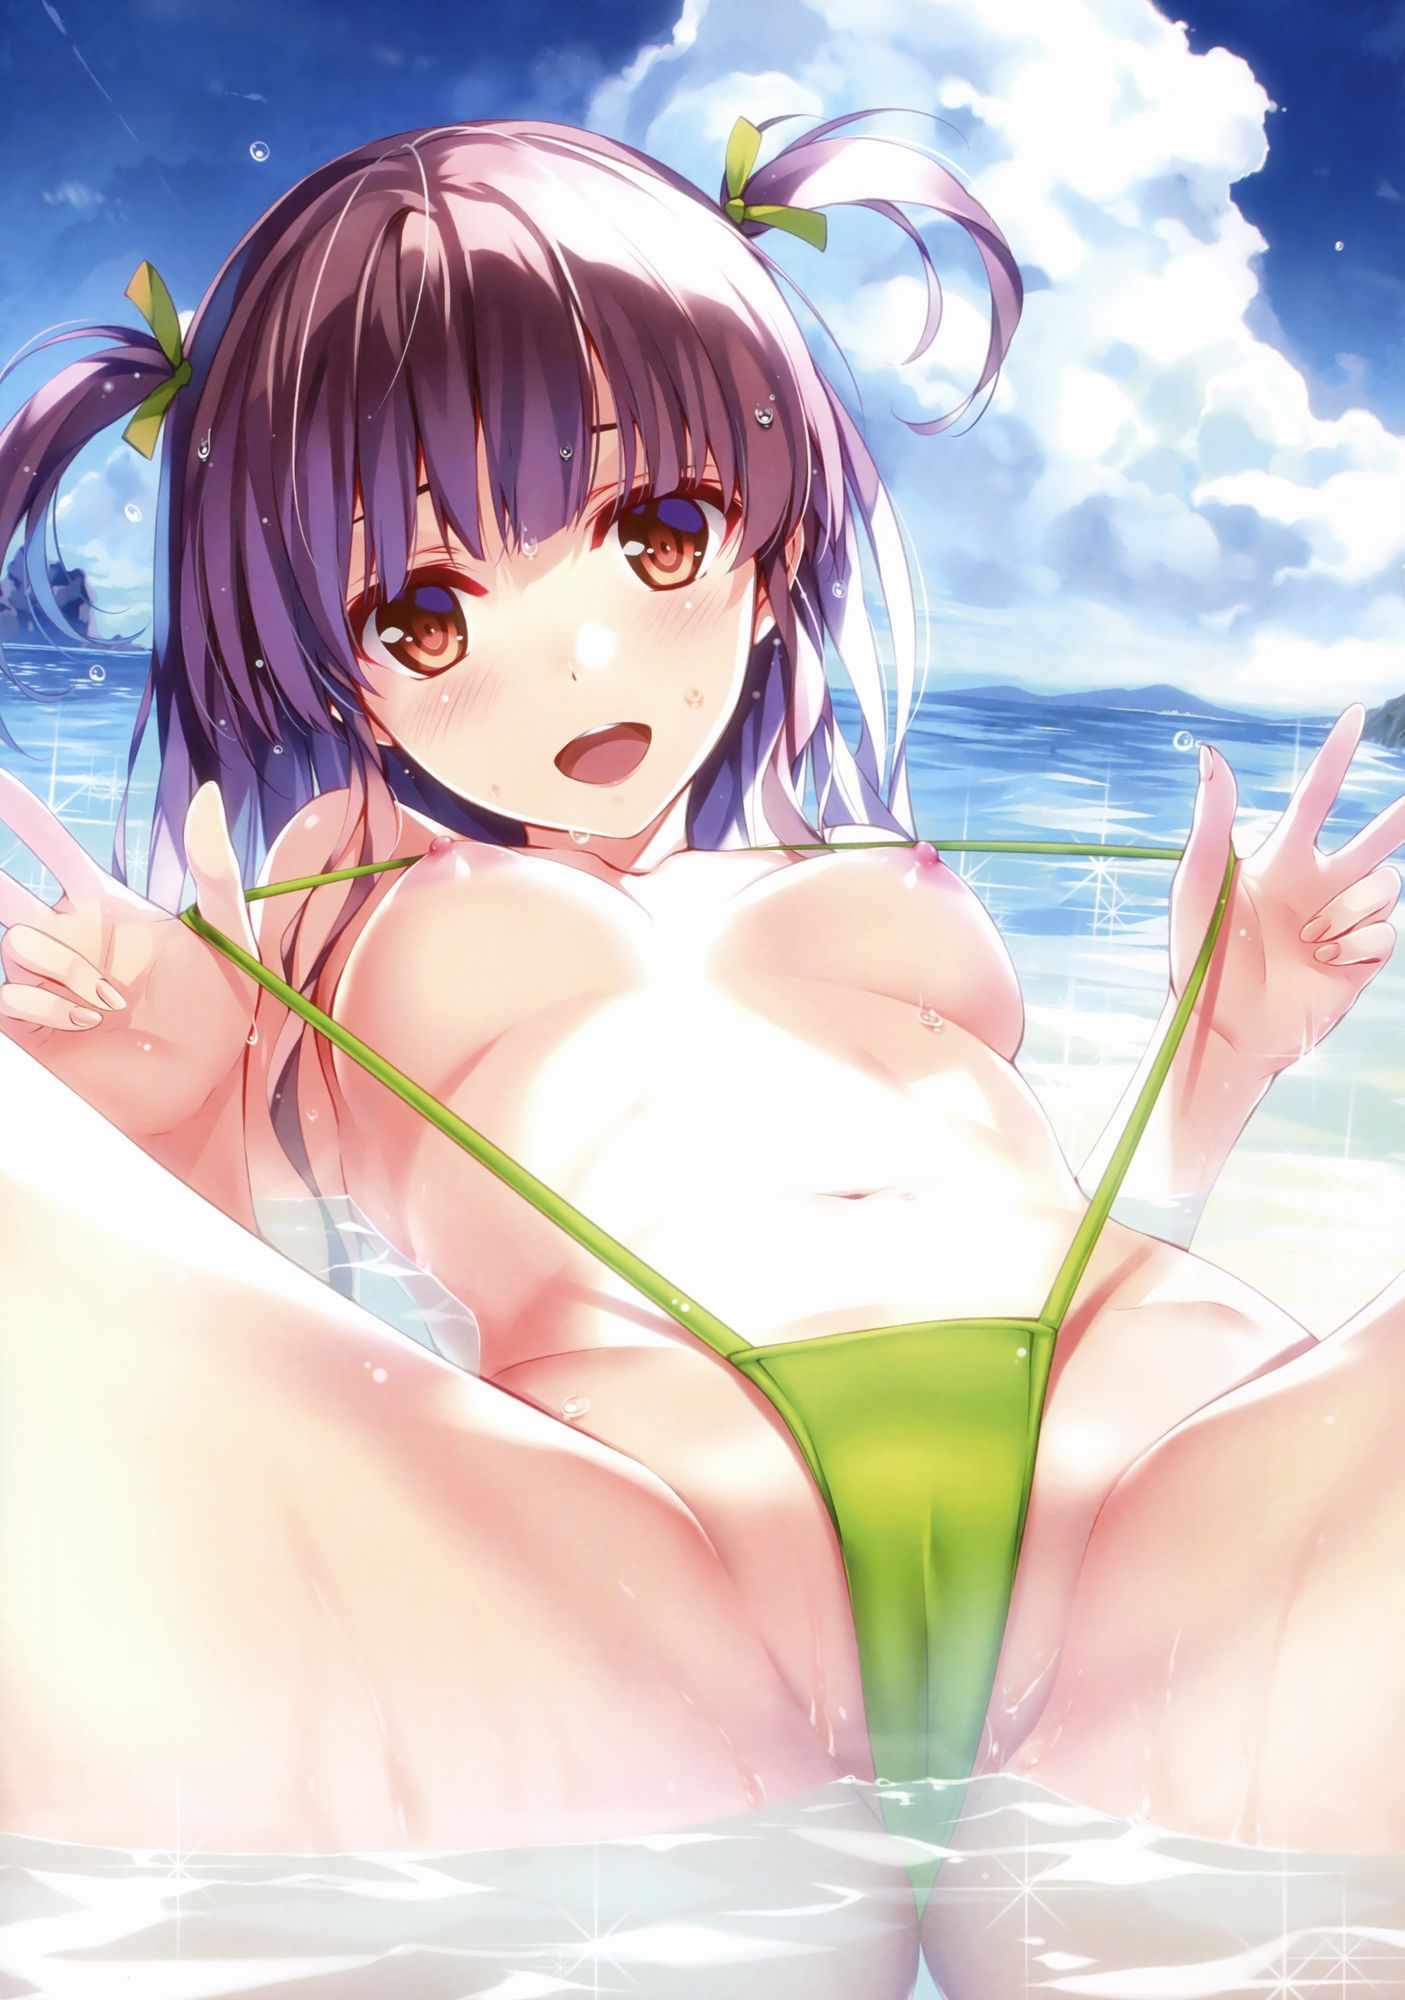 【Secondary Erotic】 Here is the erotic image of a girl wearing a swimsuit called a sling shot 9